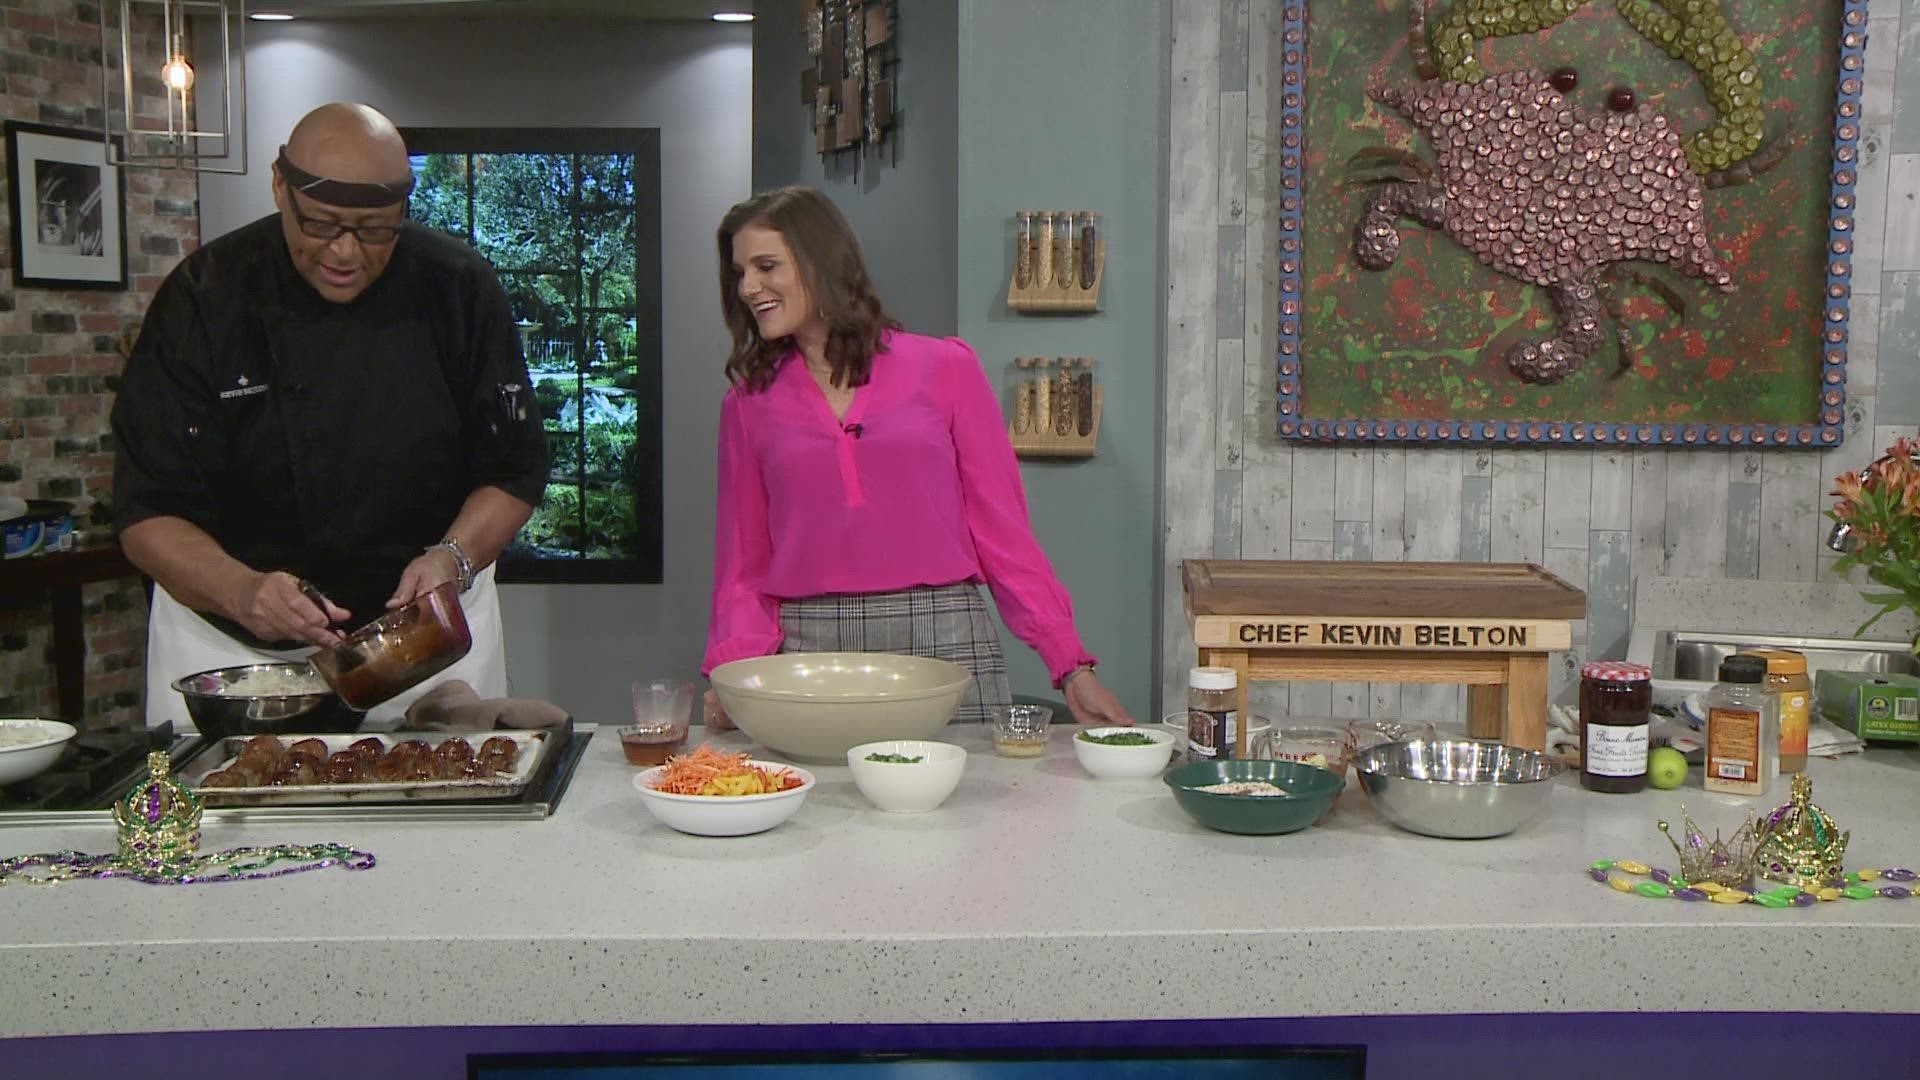 Chef Kevin Belton cooks up Peanut Noodles with Asian Glazed Meatballs.